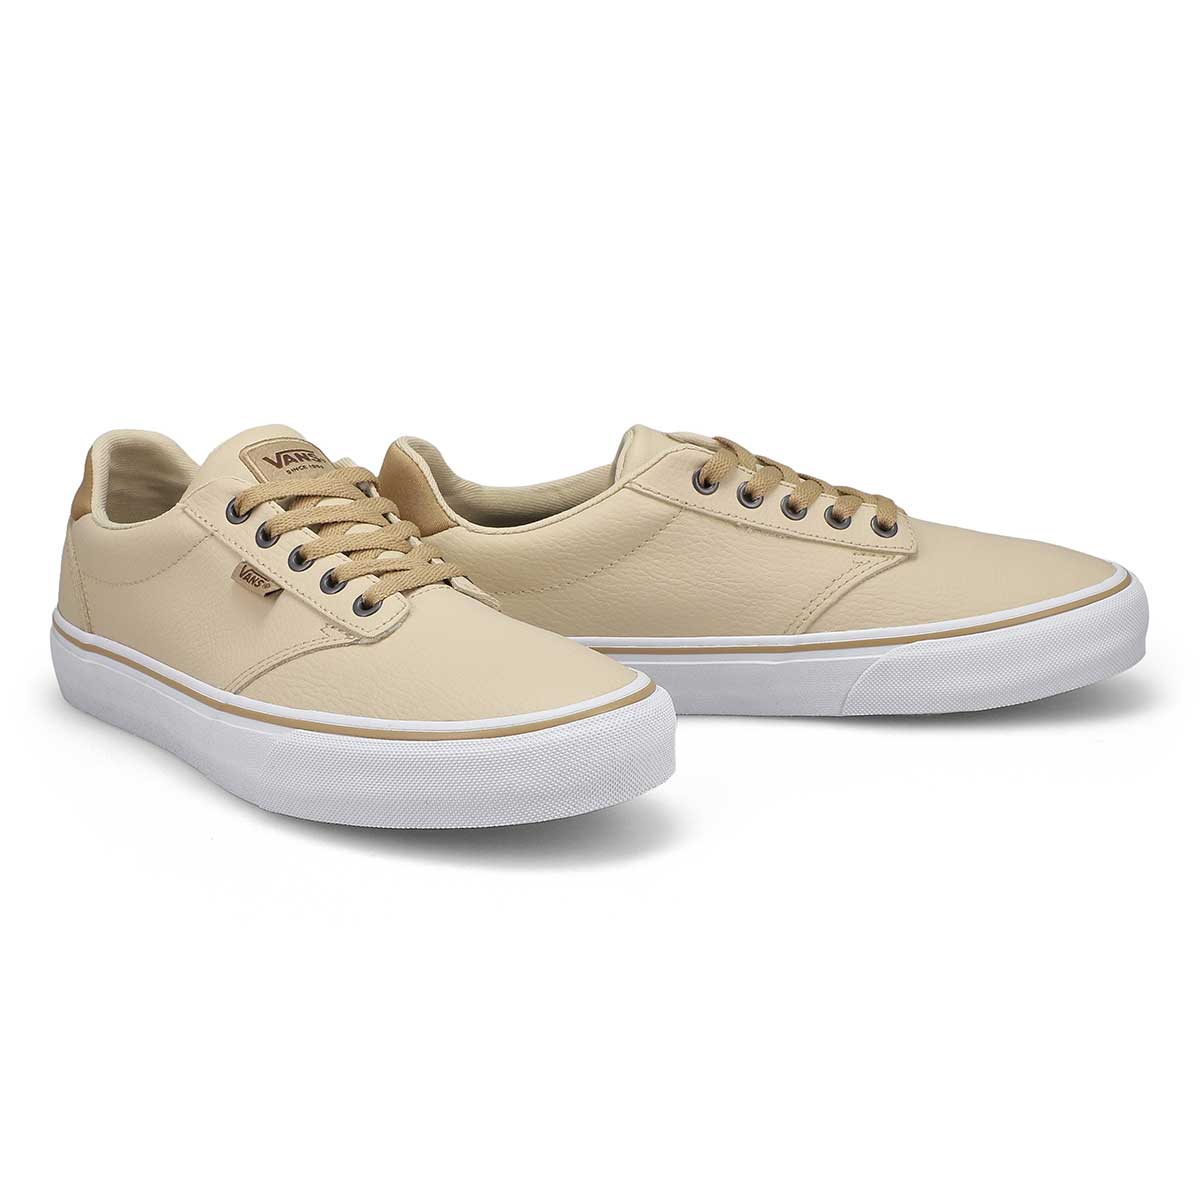 Men's Atwood Deluxe Sneaker - Taupe